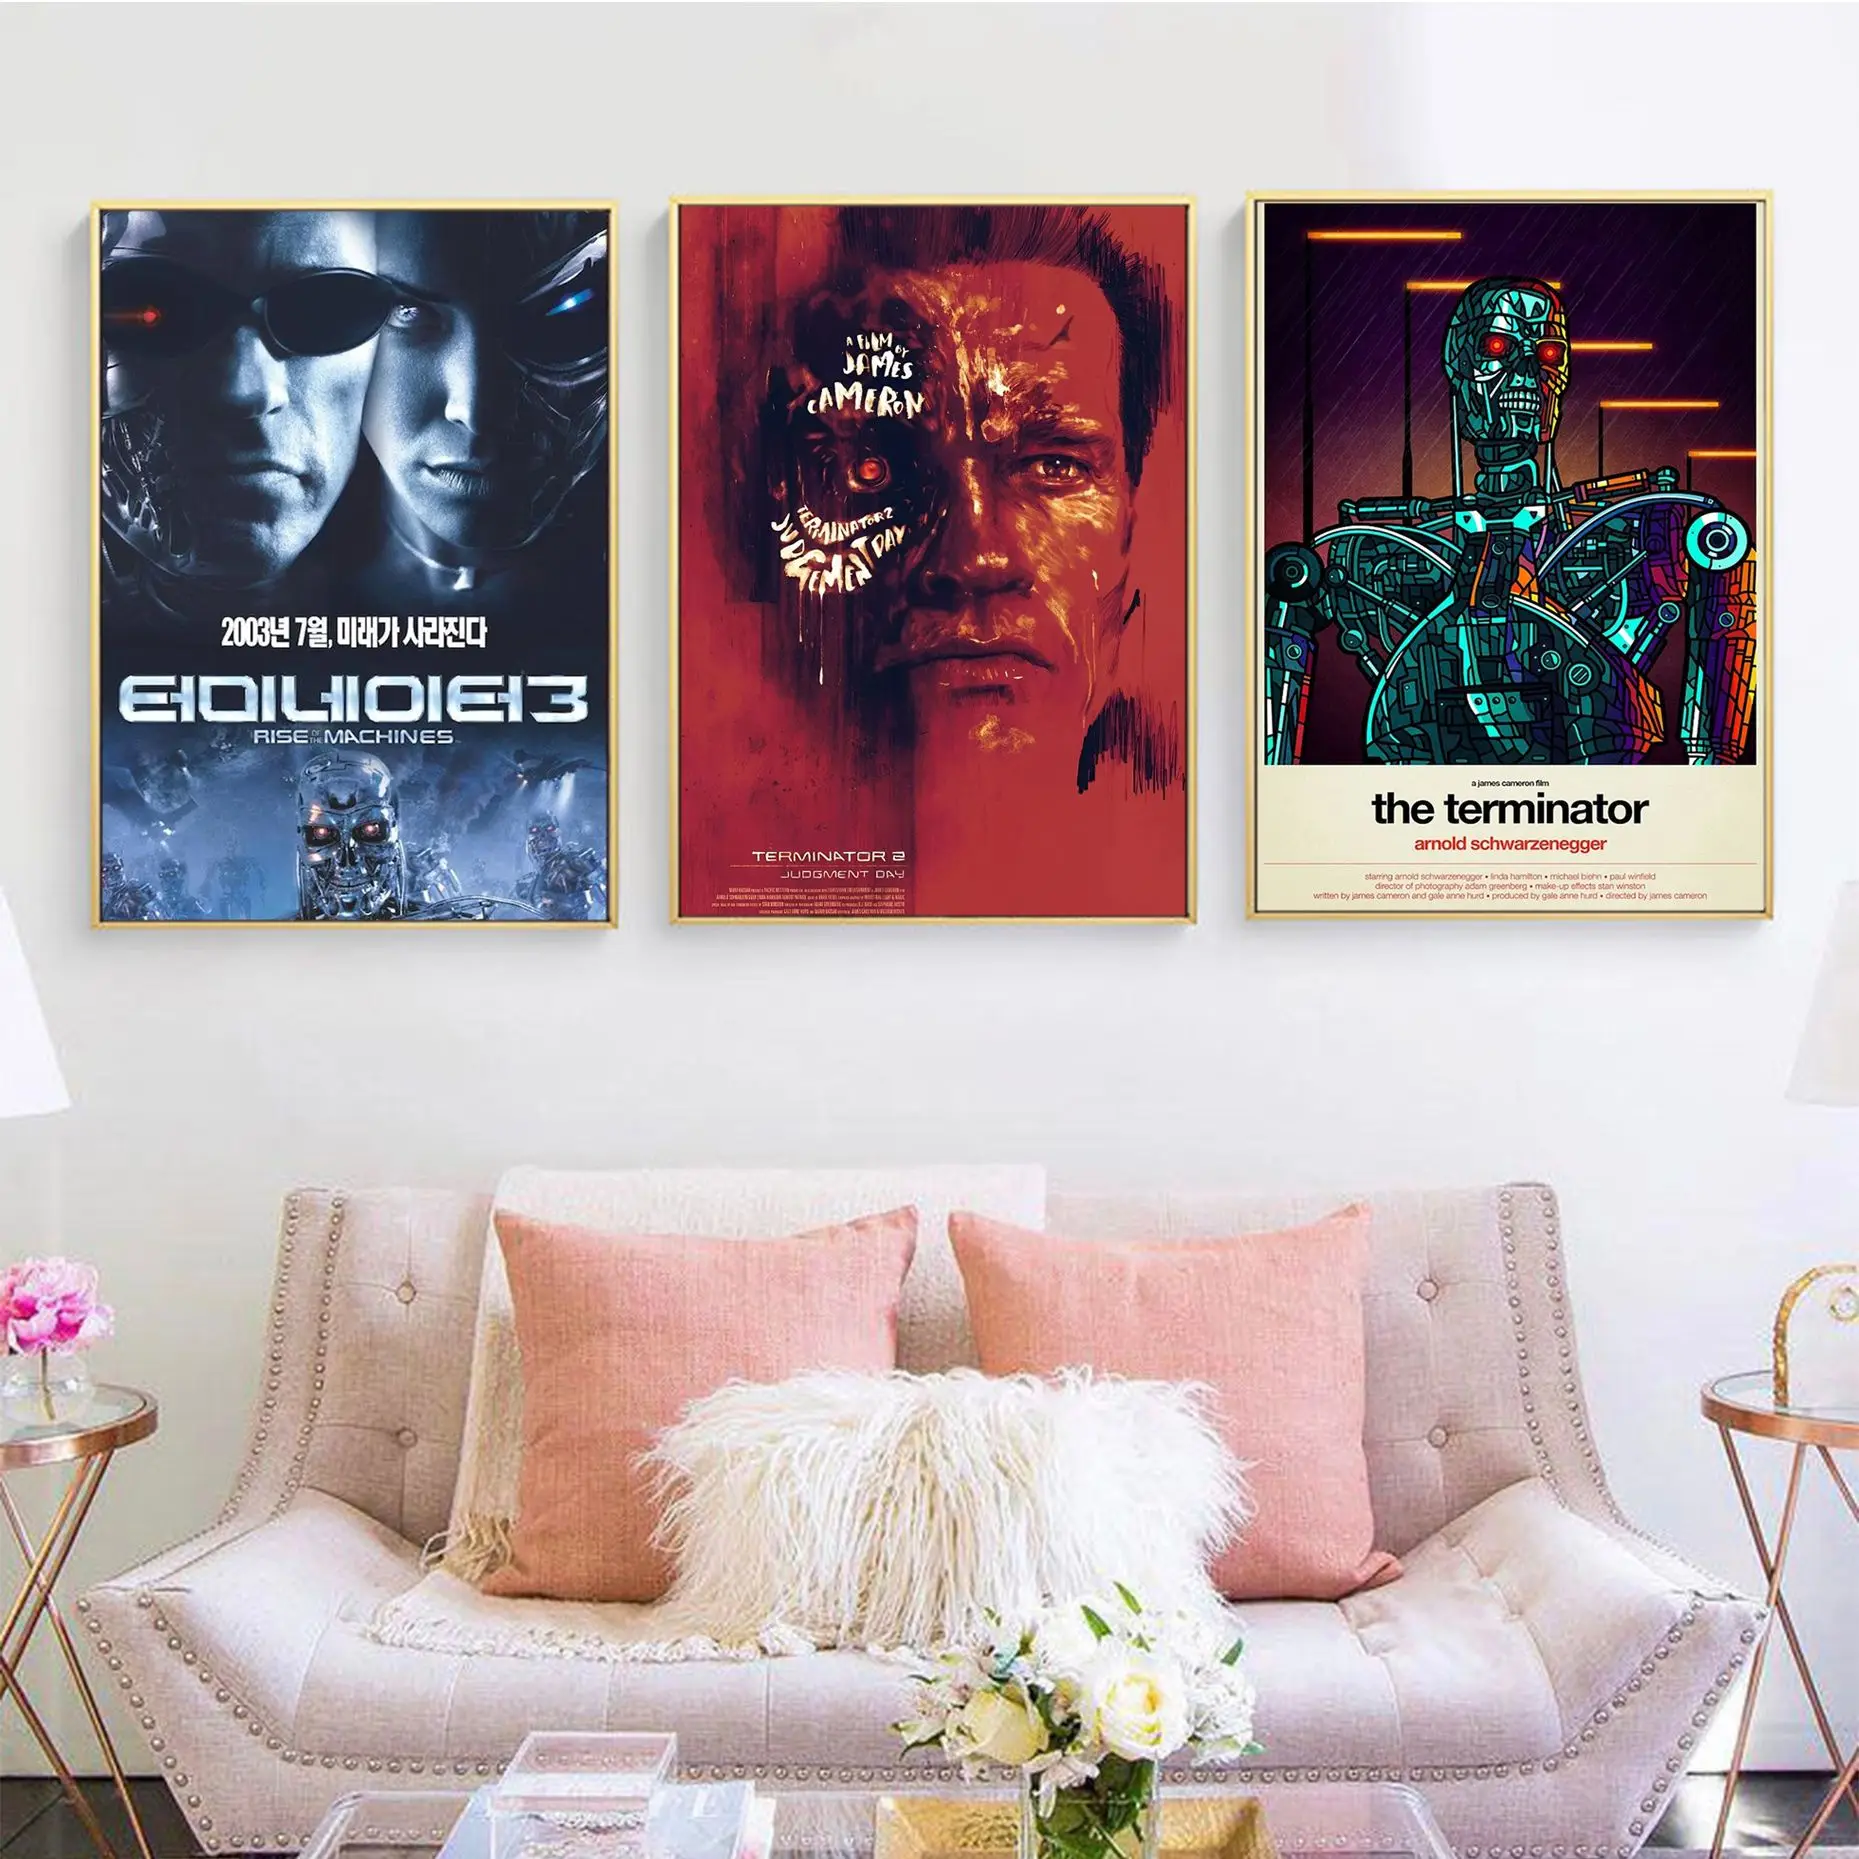 

The Terminator Classic Movie Posters Whitepaper Sticker DIY Room Bar Cafe Aesthetic Art Wall Painting